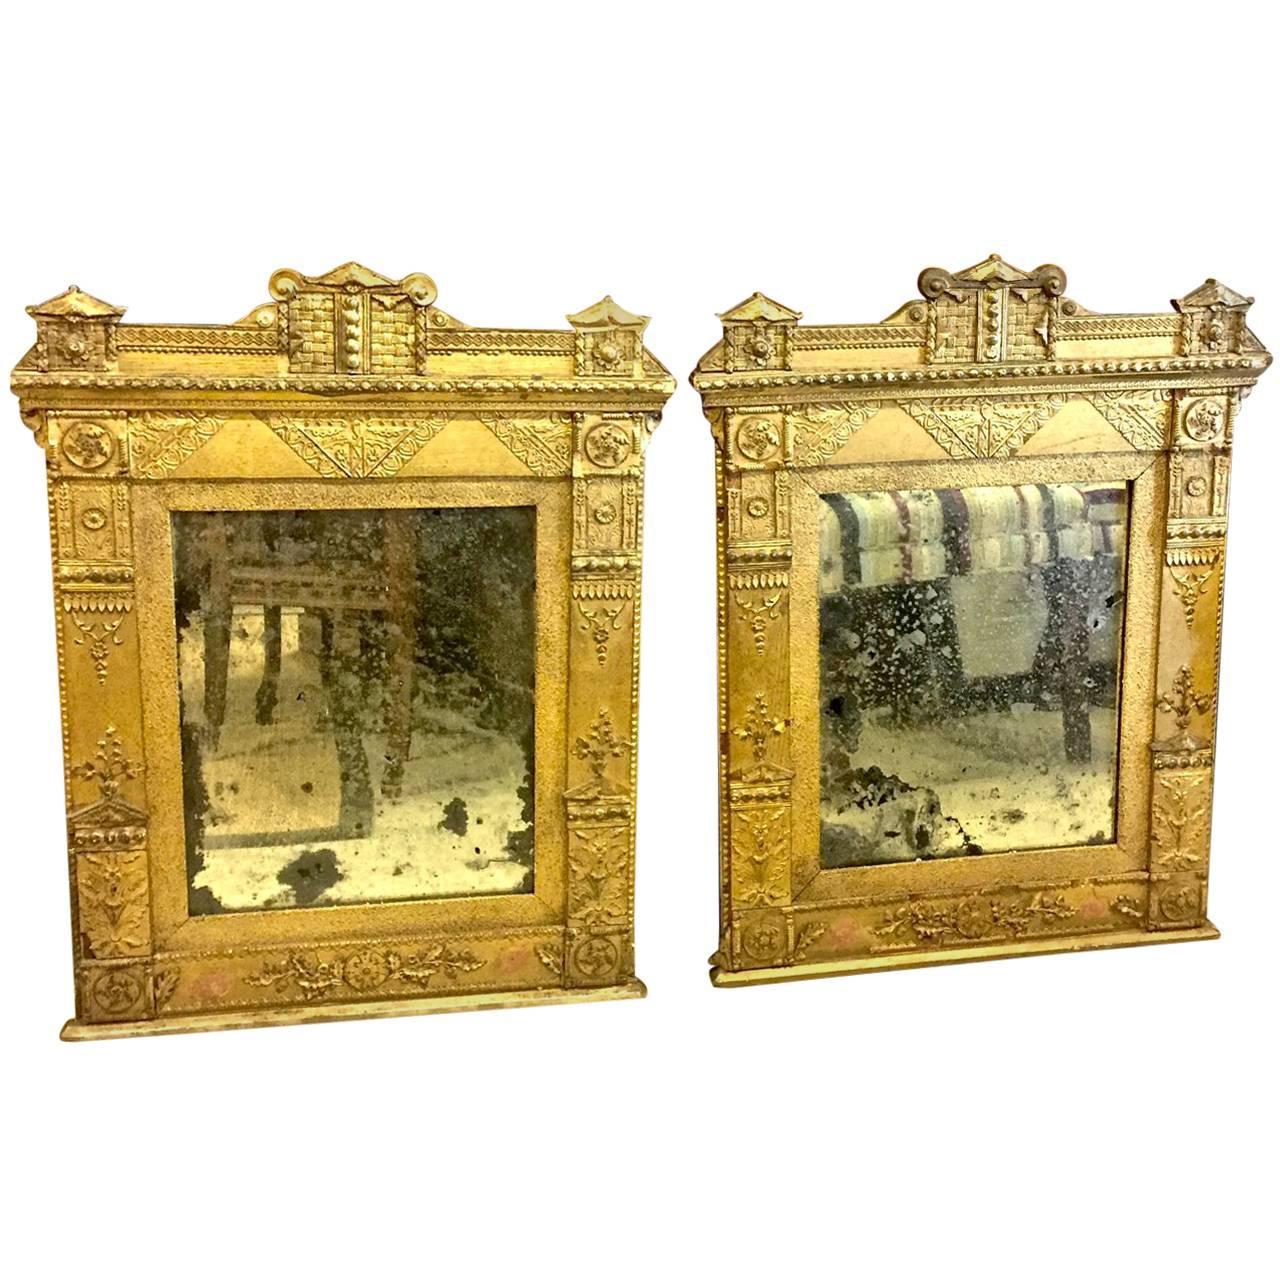 Pair of Late 18th Century French Directoire Gilt Mirrors